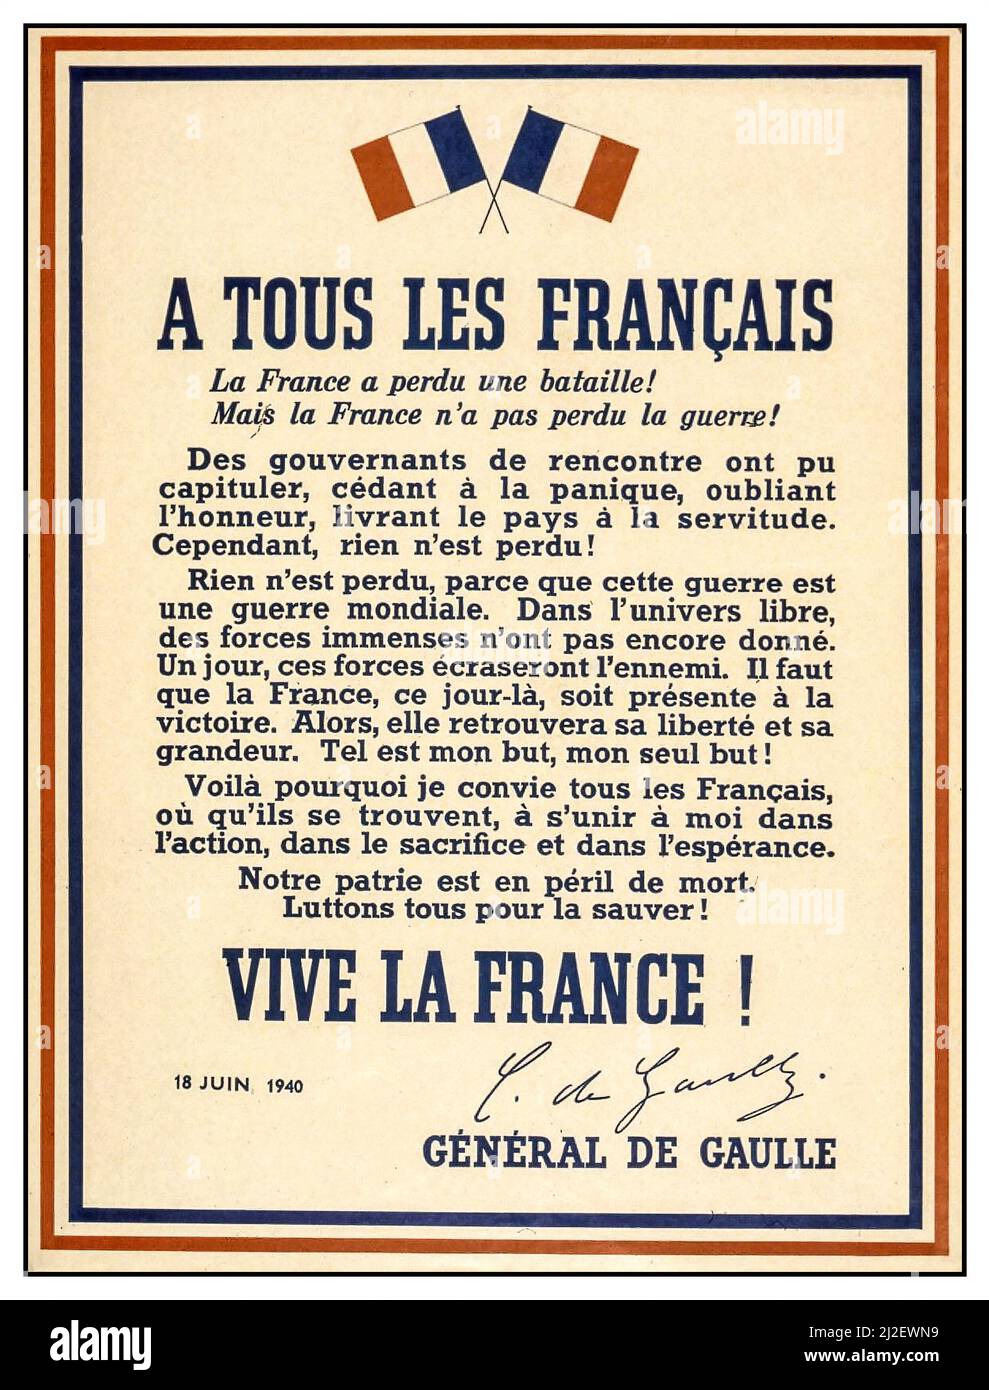 French WW2 Propaganda Poster from General de Gaulle ‘TO ALL FRENCHMEN!’ Francs e has lost a battle! But France has not lost the war! june 1940 Some that have happened into governing positions may have capitulated, ceding to panic, forgetting honour, delivering the country to servitude. However, nothing is lost! Because this war is a world war. In the free universe, immense forces have yet to get into the fray. One day, those forces will crush the enemy. That day, France must be there for victory. Then she will find her liberty and her greatness again. Such is my goal......    ‘LONG LIVE FRANCE Stock Photo